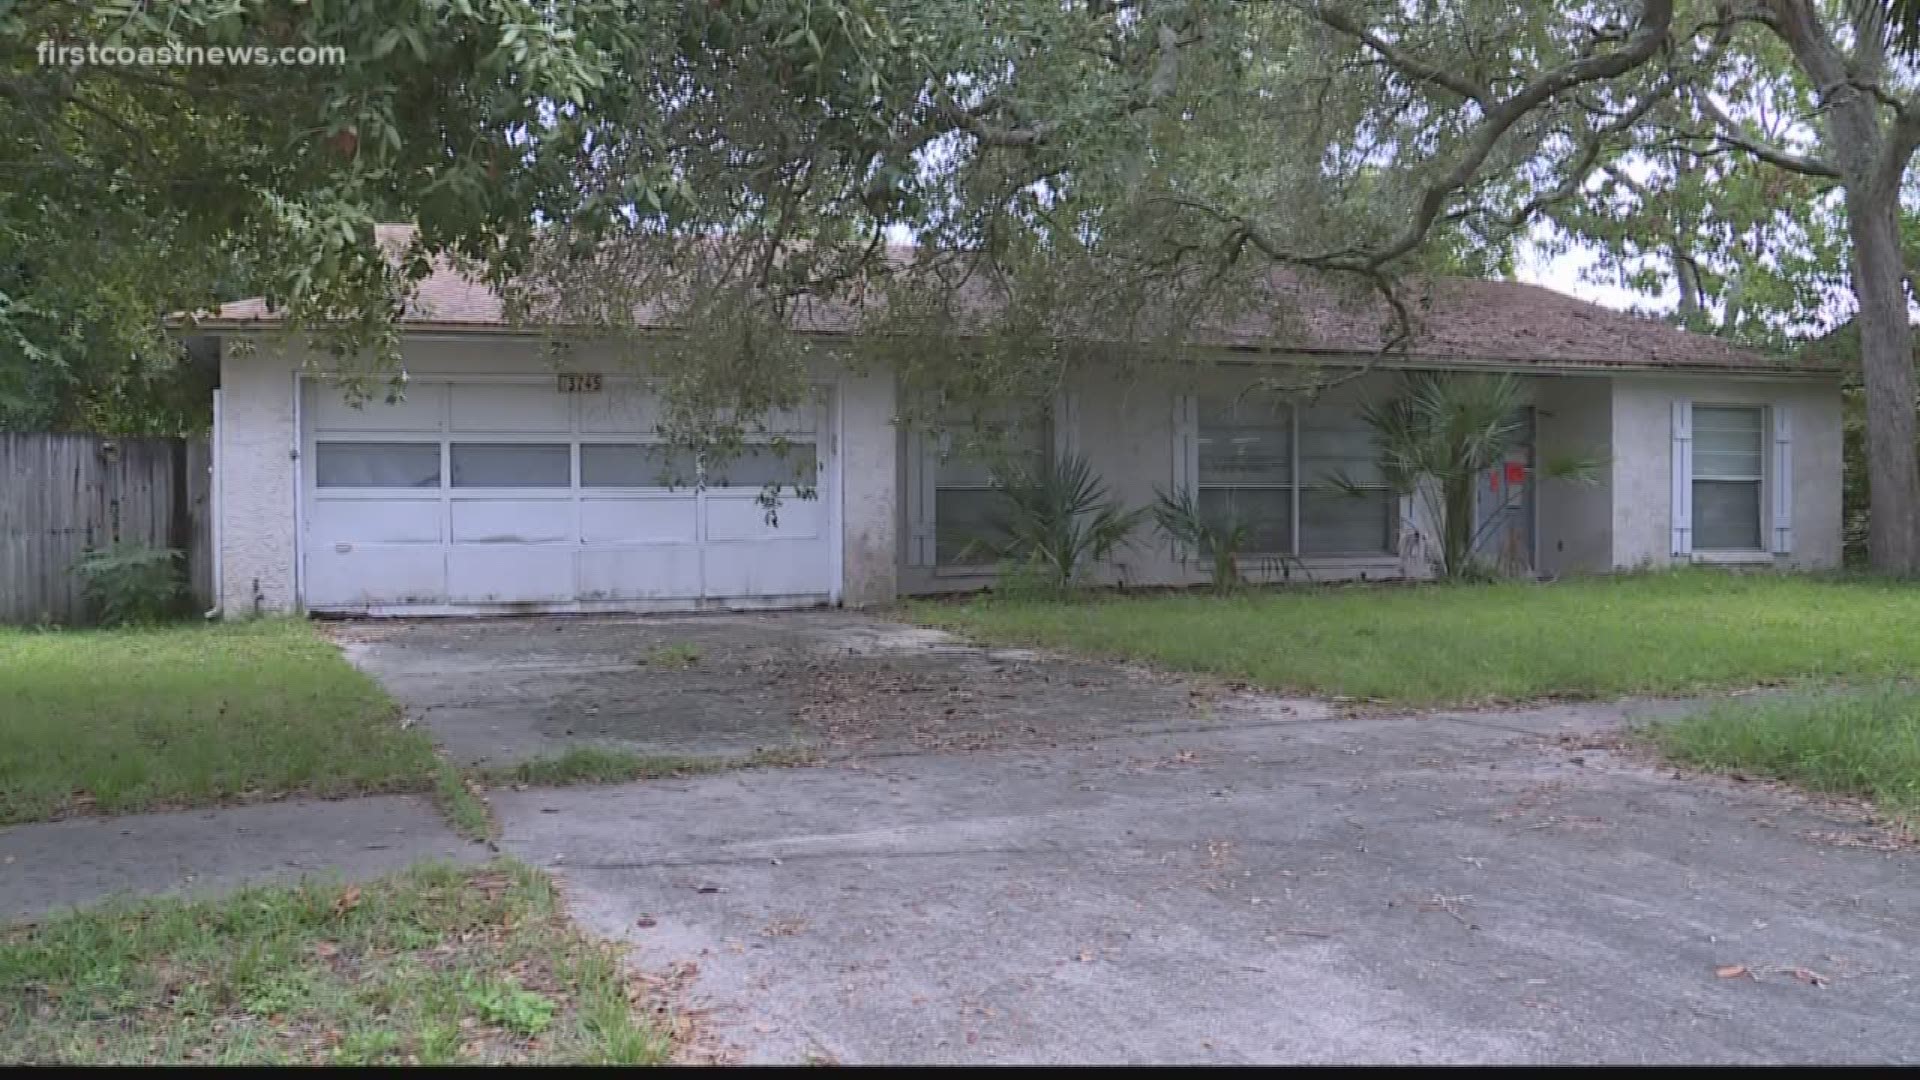 The residents of Isle of Palms South want something done about an abandoned, rat-infested home that has become an eyesore.